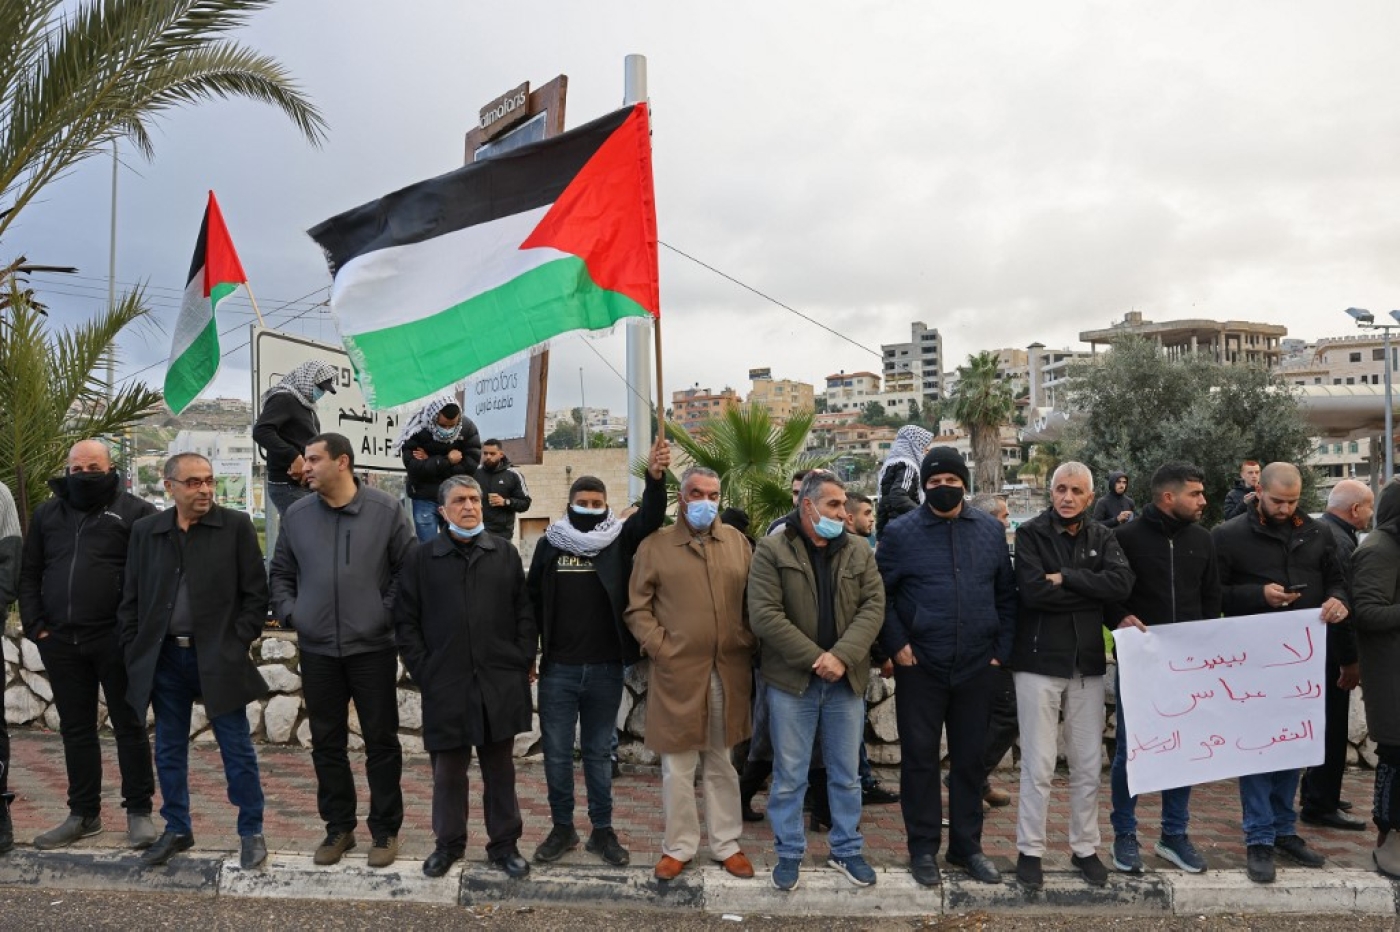 Arab Israelis shout slogans and wave Palestinian national flags in the mostly Arab city of Umm al-Fahm in northern Israel in solidarity with Bedouin communites in the Negev Desert, on January 14, 2022